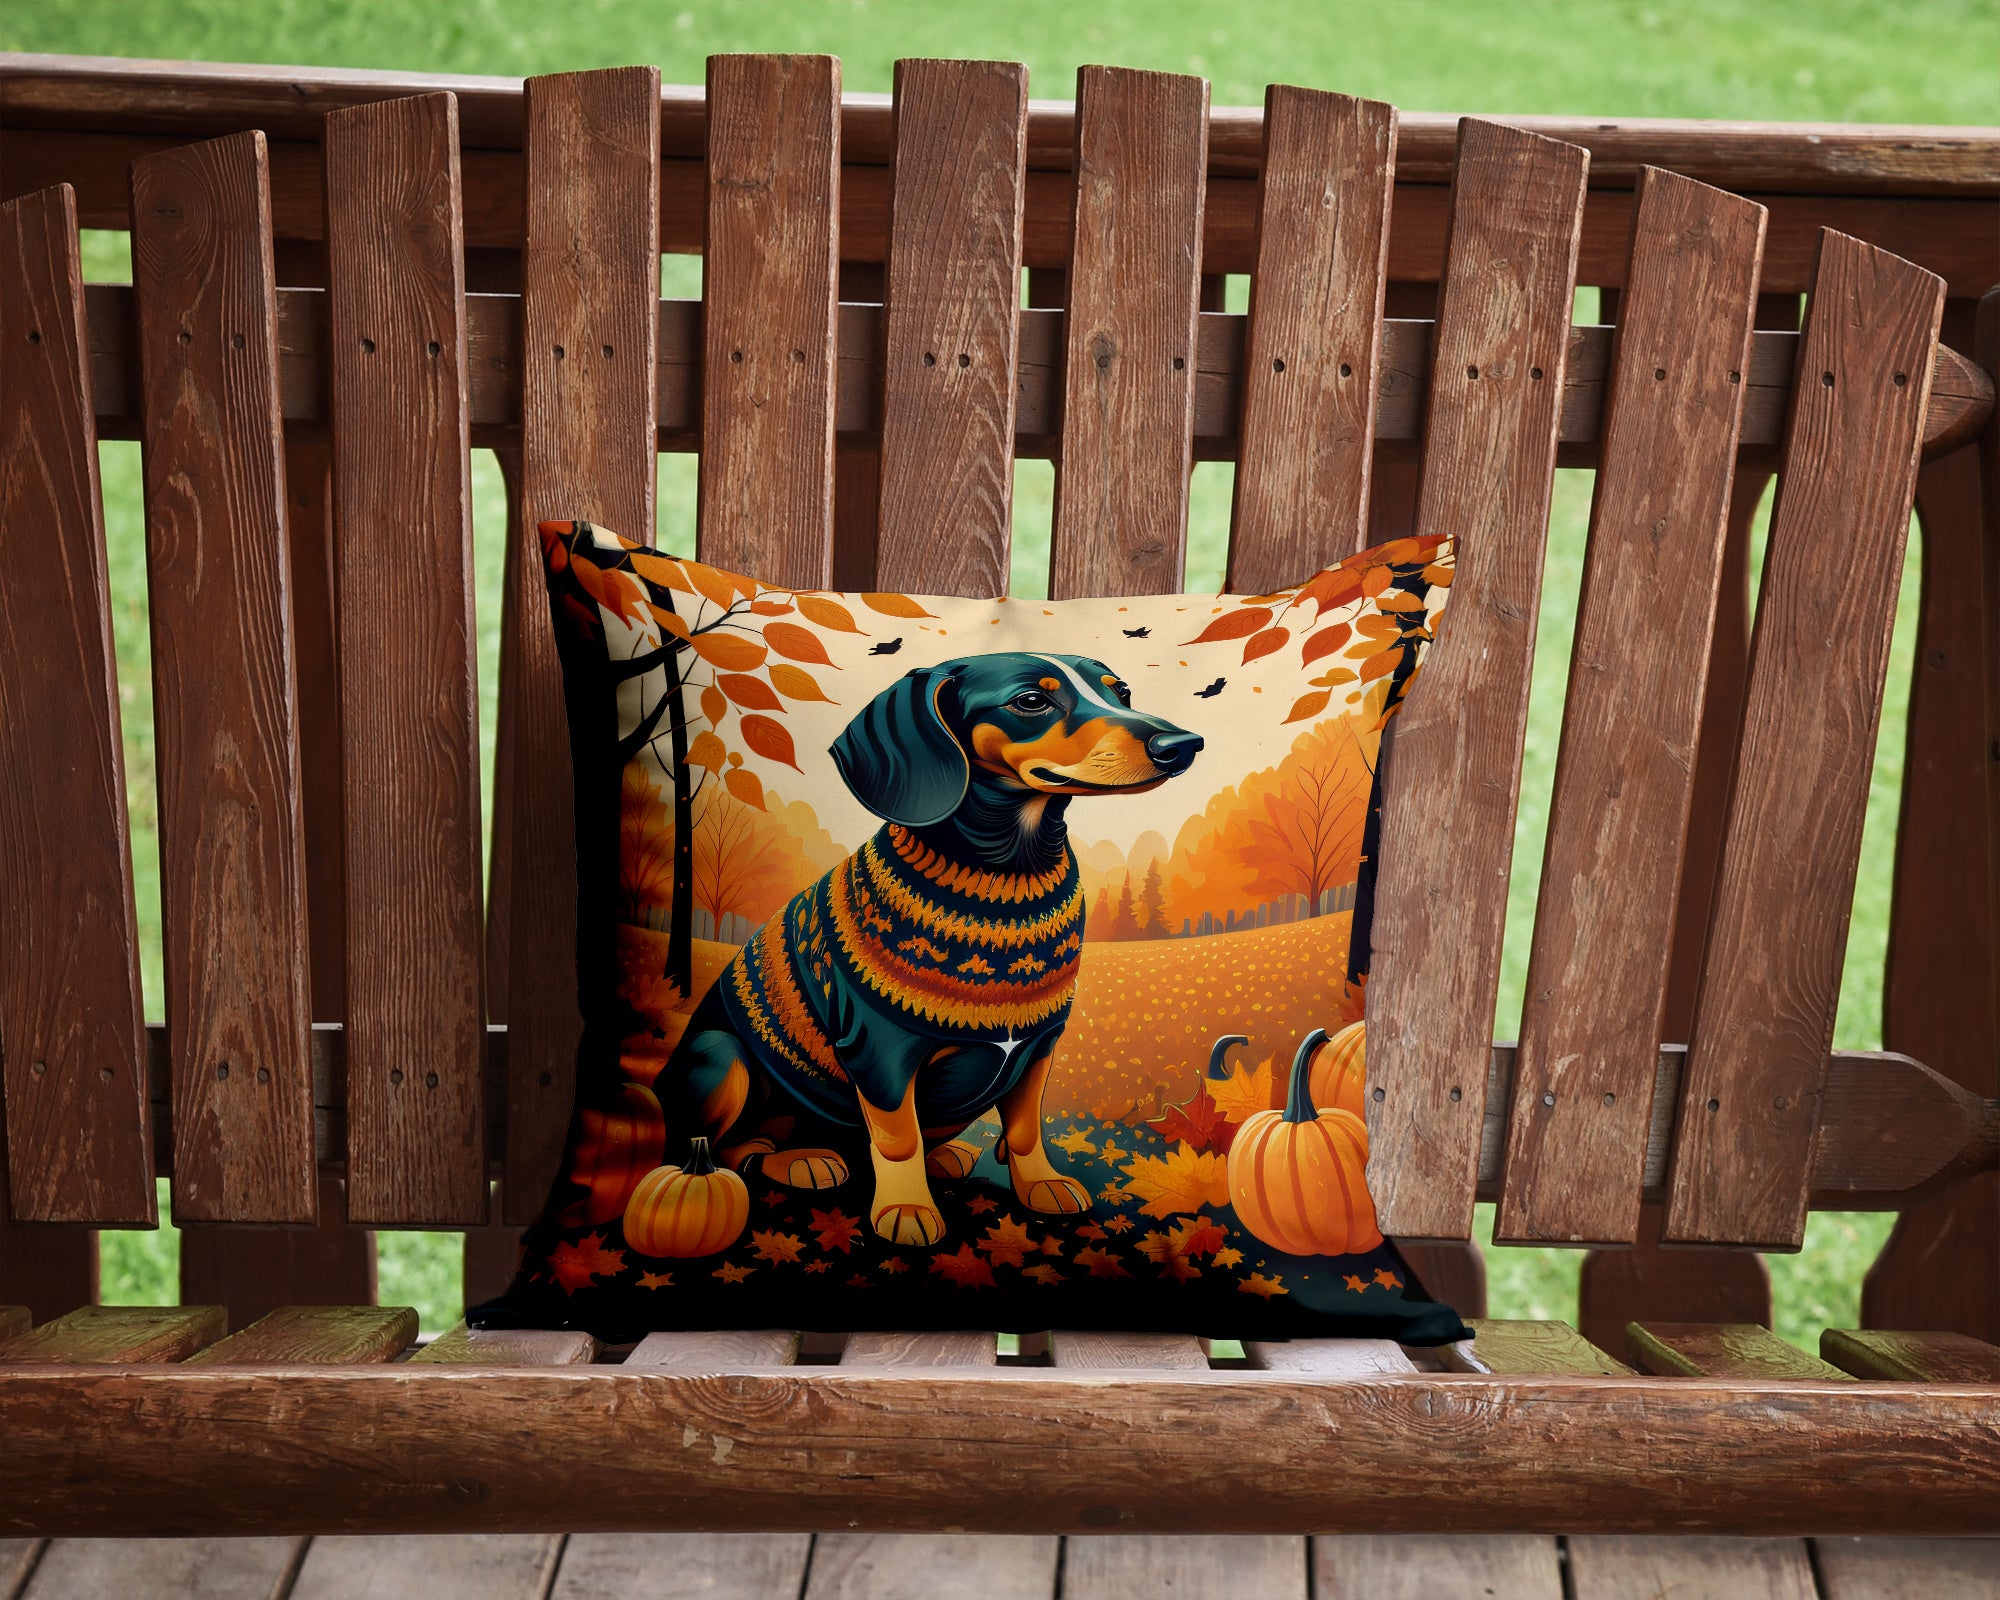 Buy this Dachshund Fall Fabric Decorative Pillow